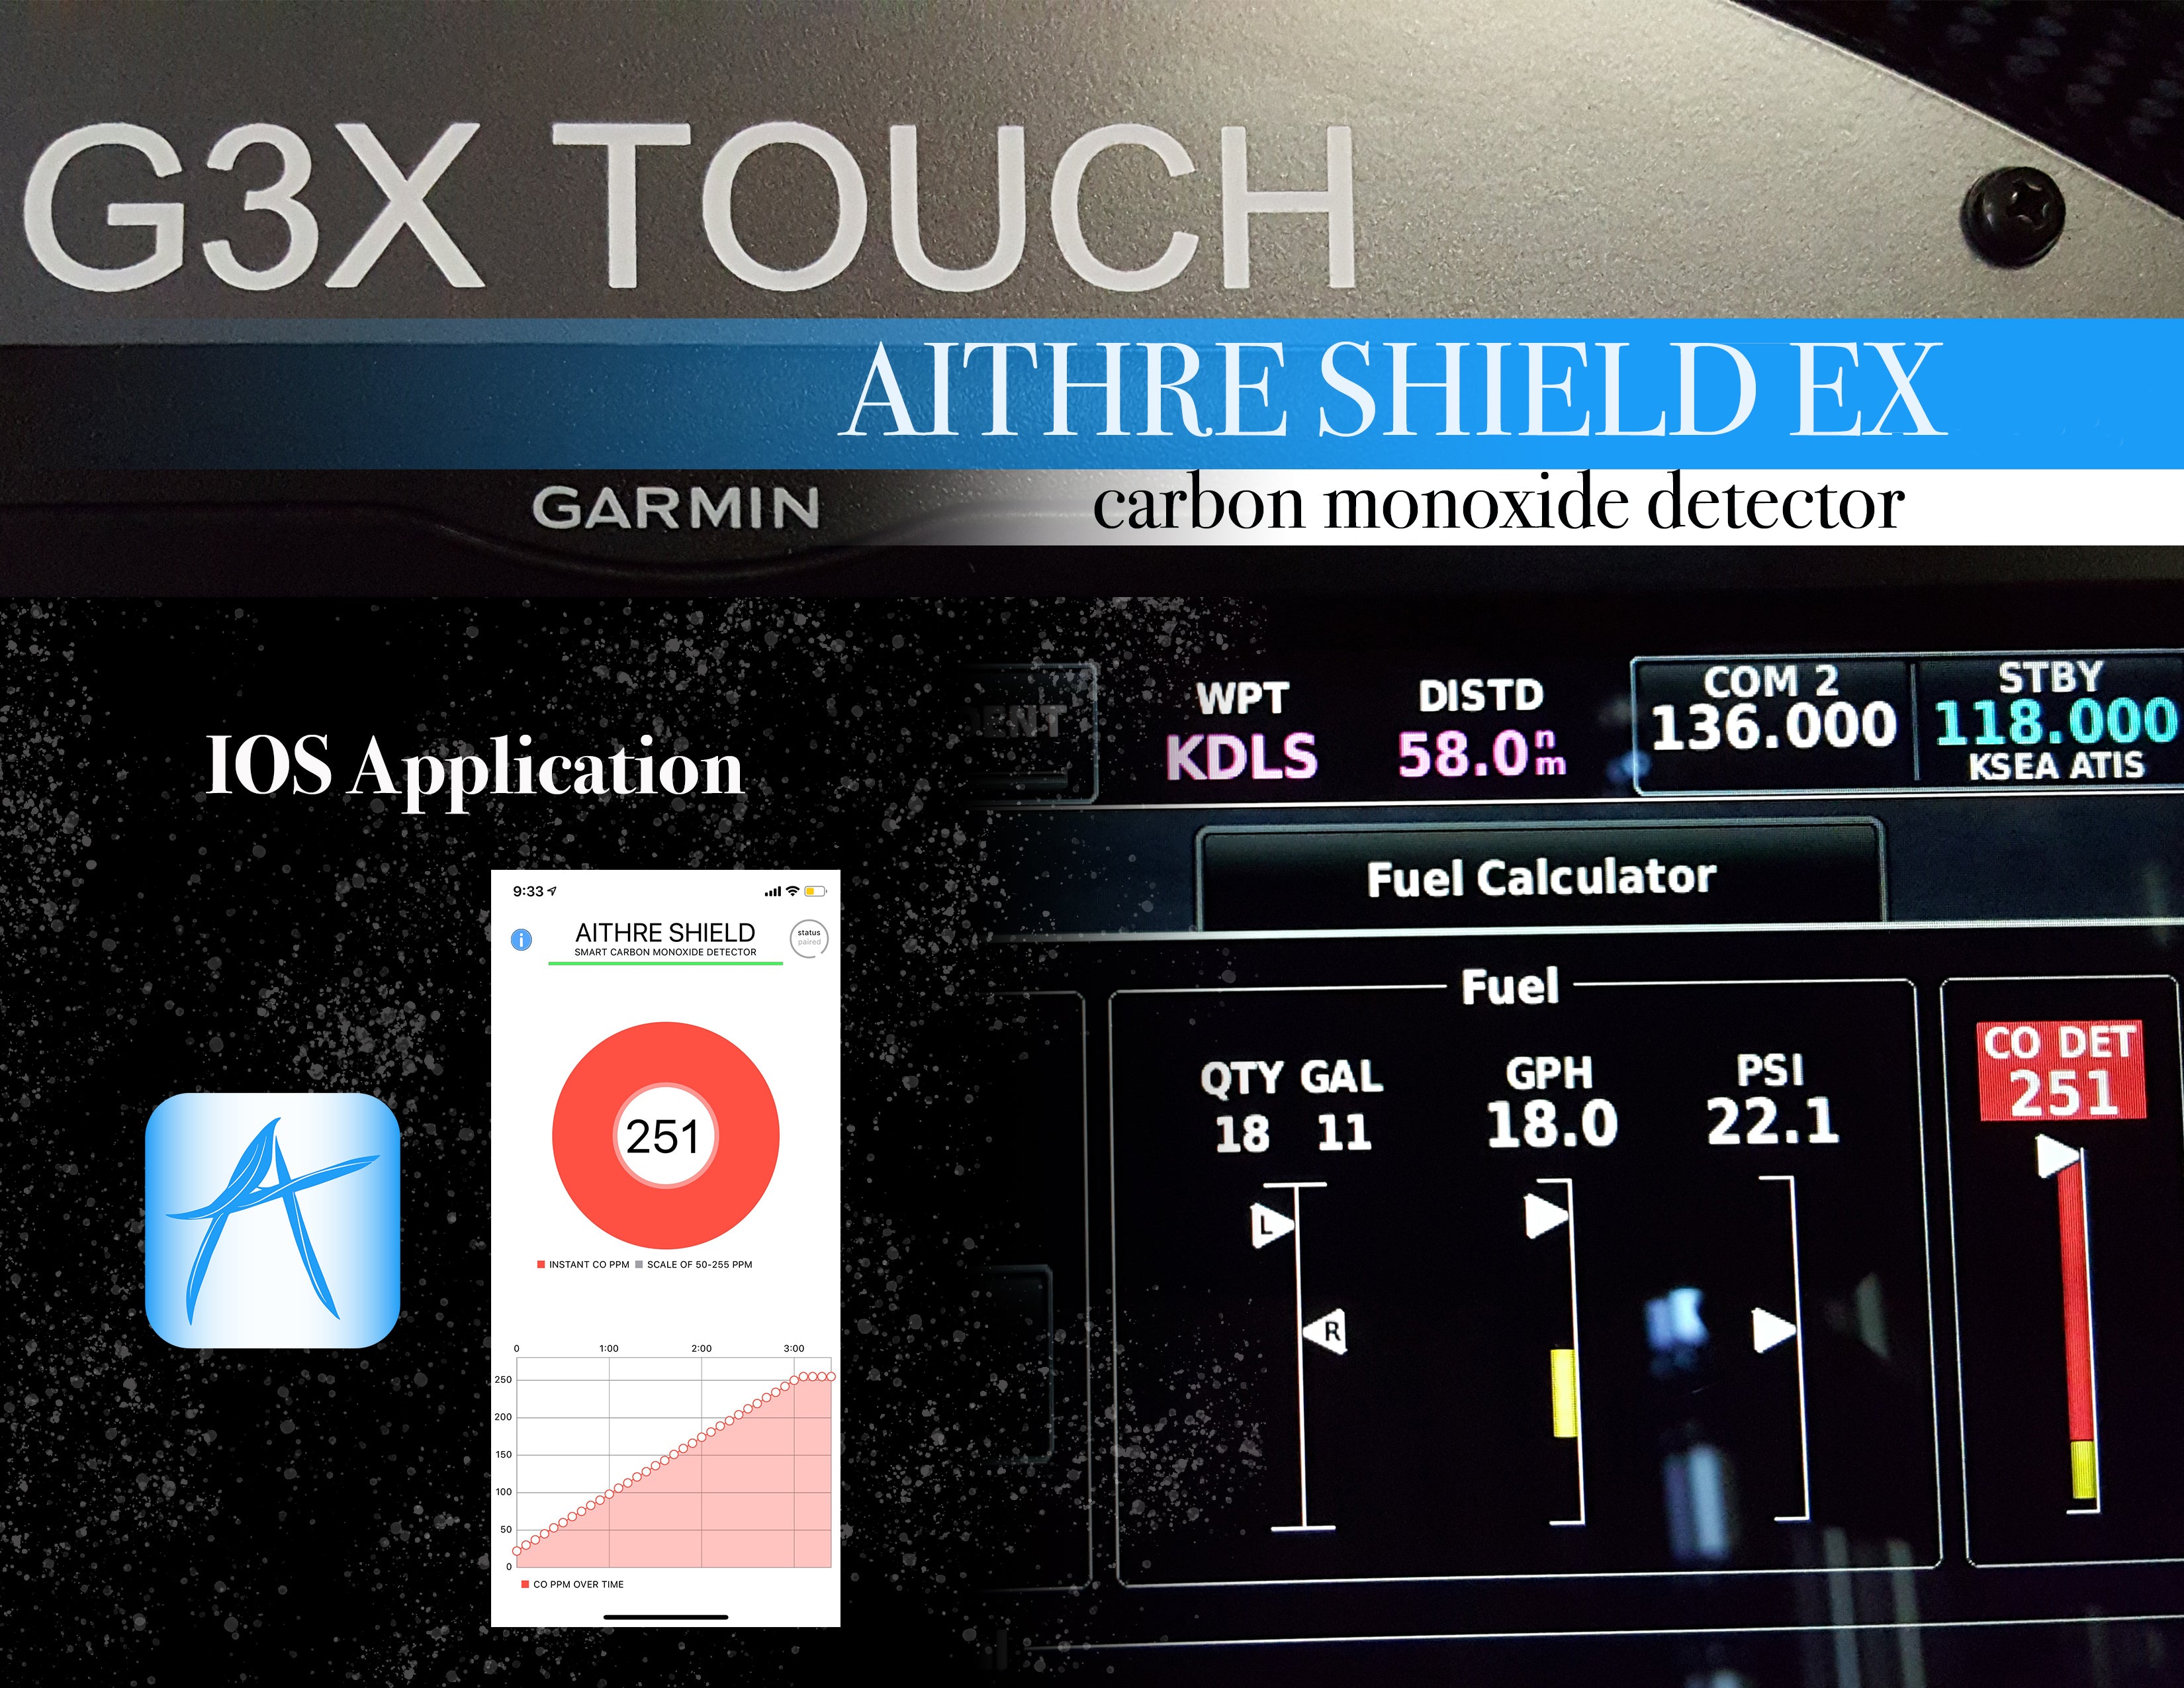 Shield EX 3.0-S Behind-the-Panel CO Detector - Altus/Illyrian Compatible - w/ iOS App w/Serial Output